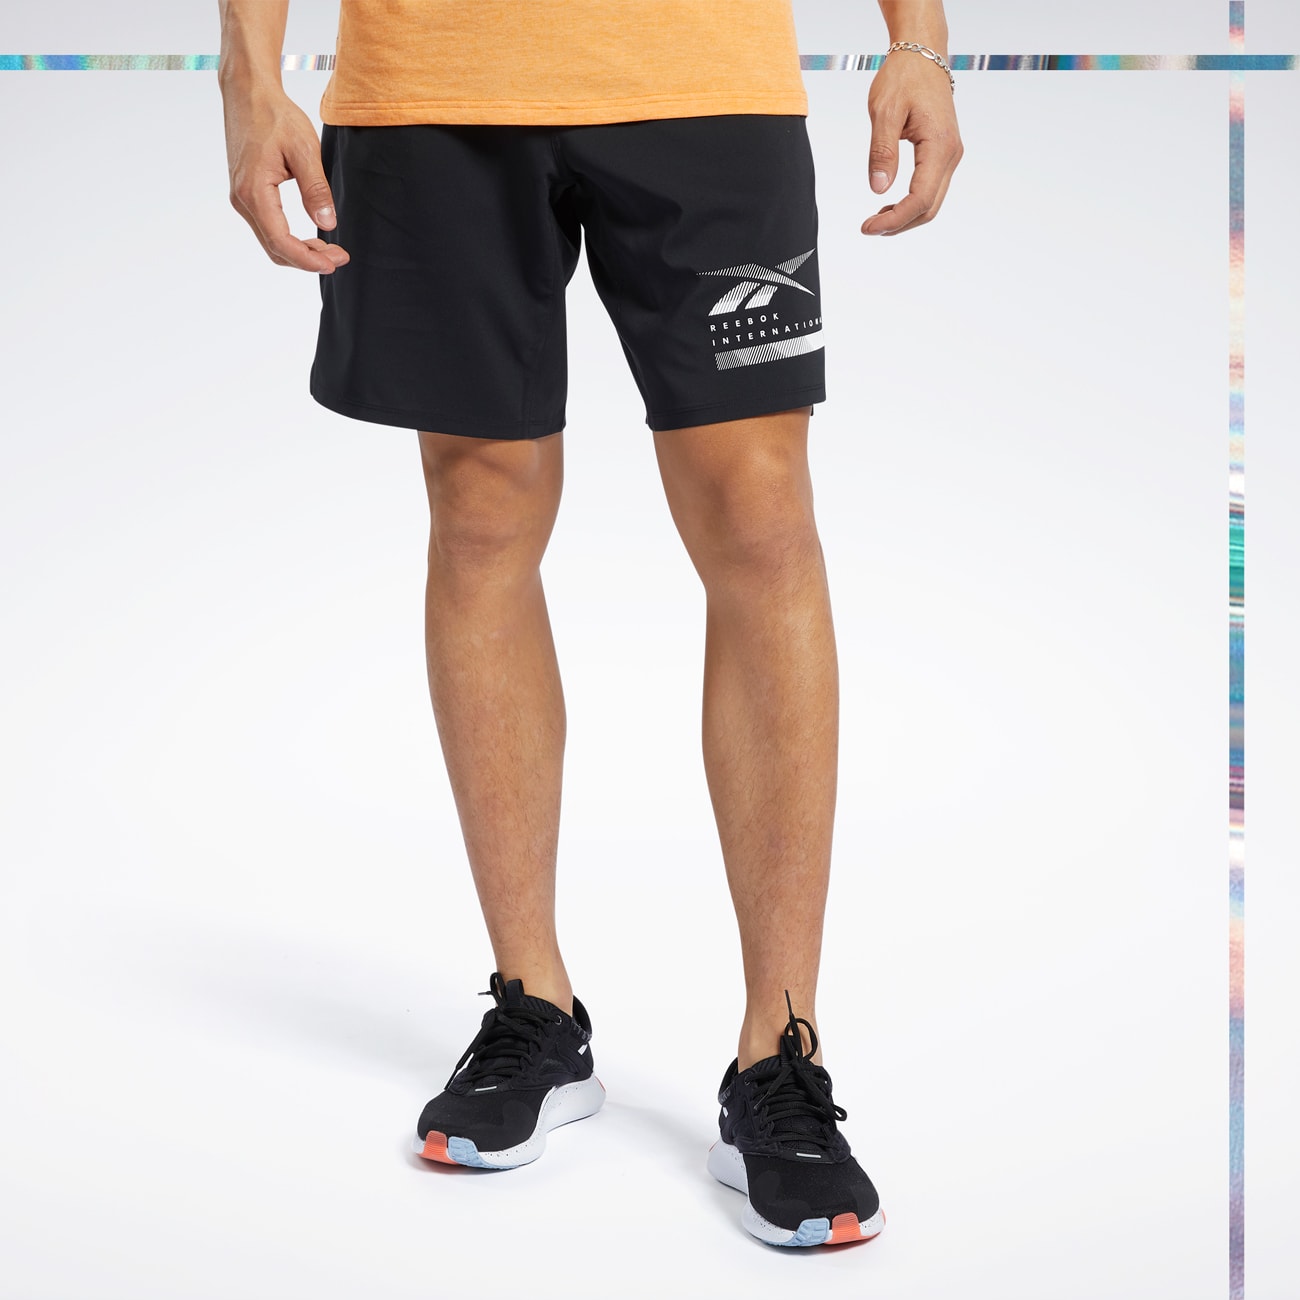 Crossfit Yoga Gym PRS Mens Perform+ Compression Shorts for Running HIIT